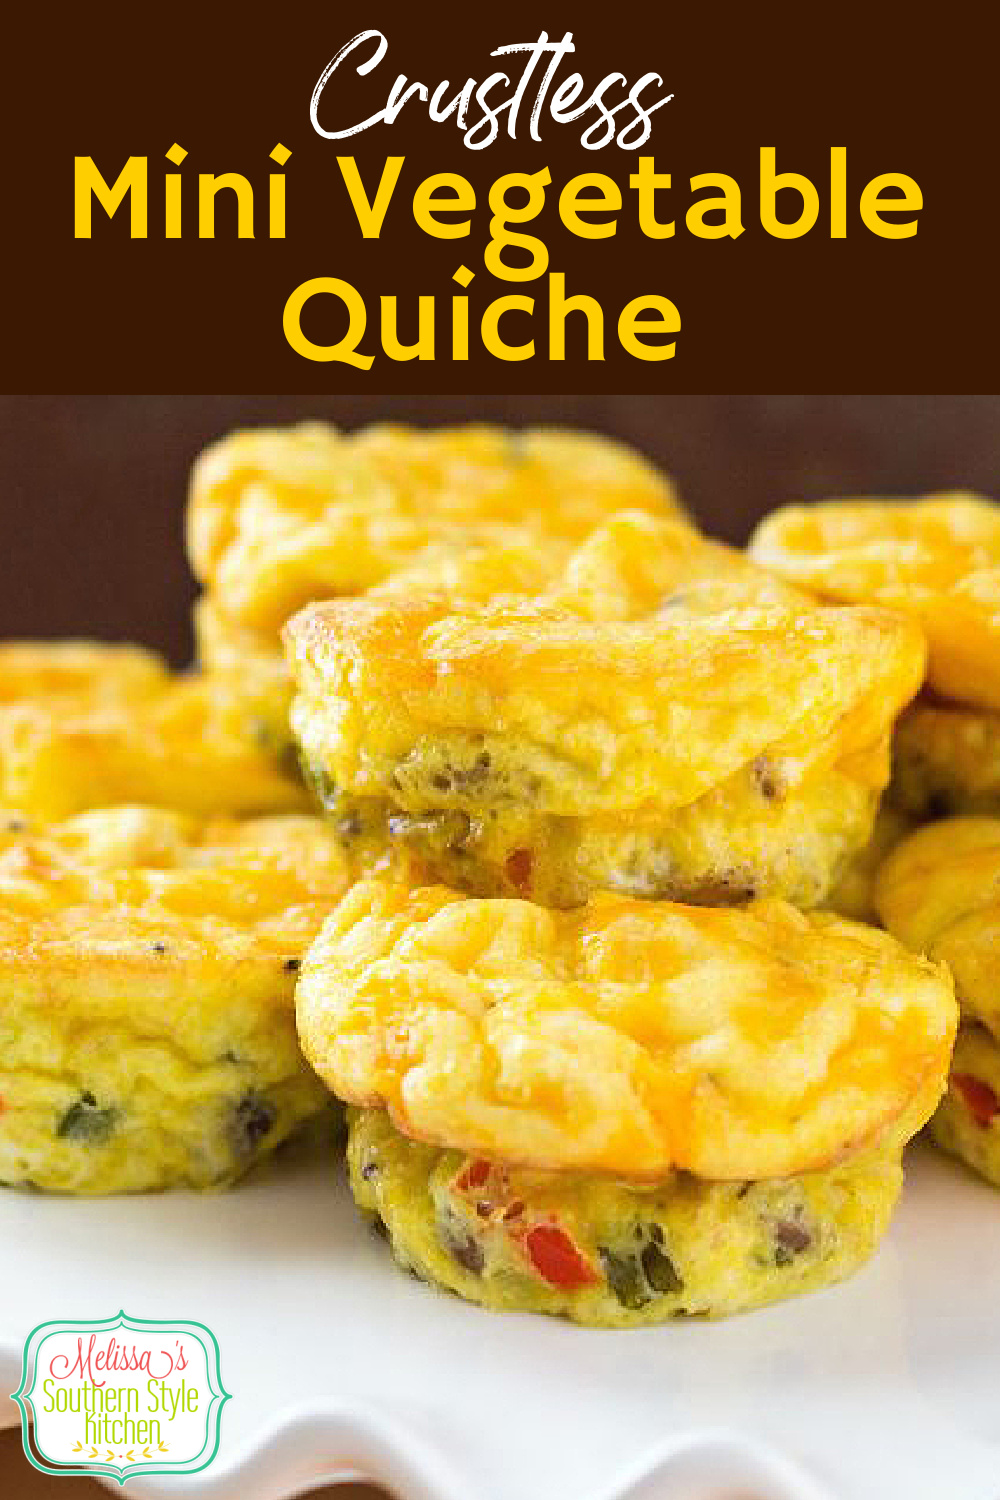 Make Crustless Mini Vegetable Quiche in a muffin pan and you can personalize each one to your taste #muffineggs #quicherecipes #muffinpanrecipes #eggmuffins #eggs #muffinrecipes #lowcarb #ketorecipes #vegetablequiche